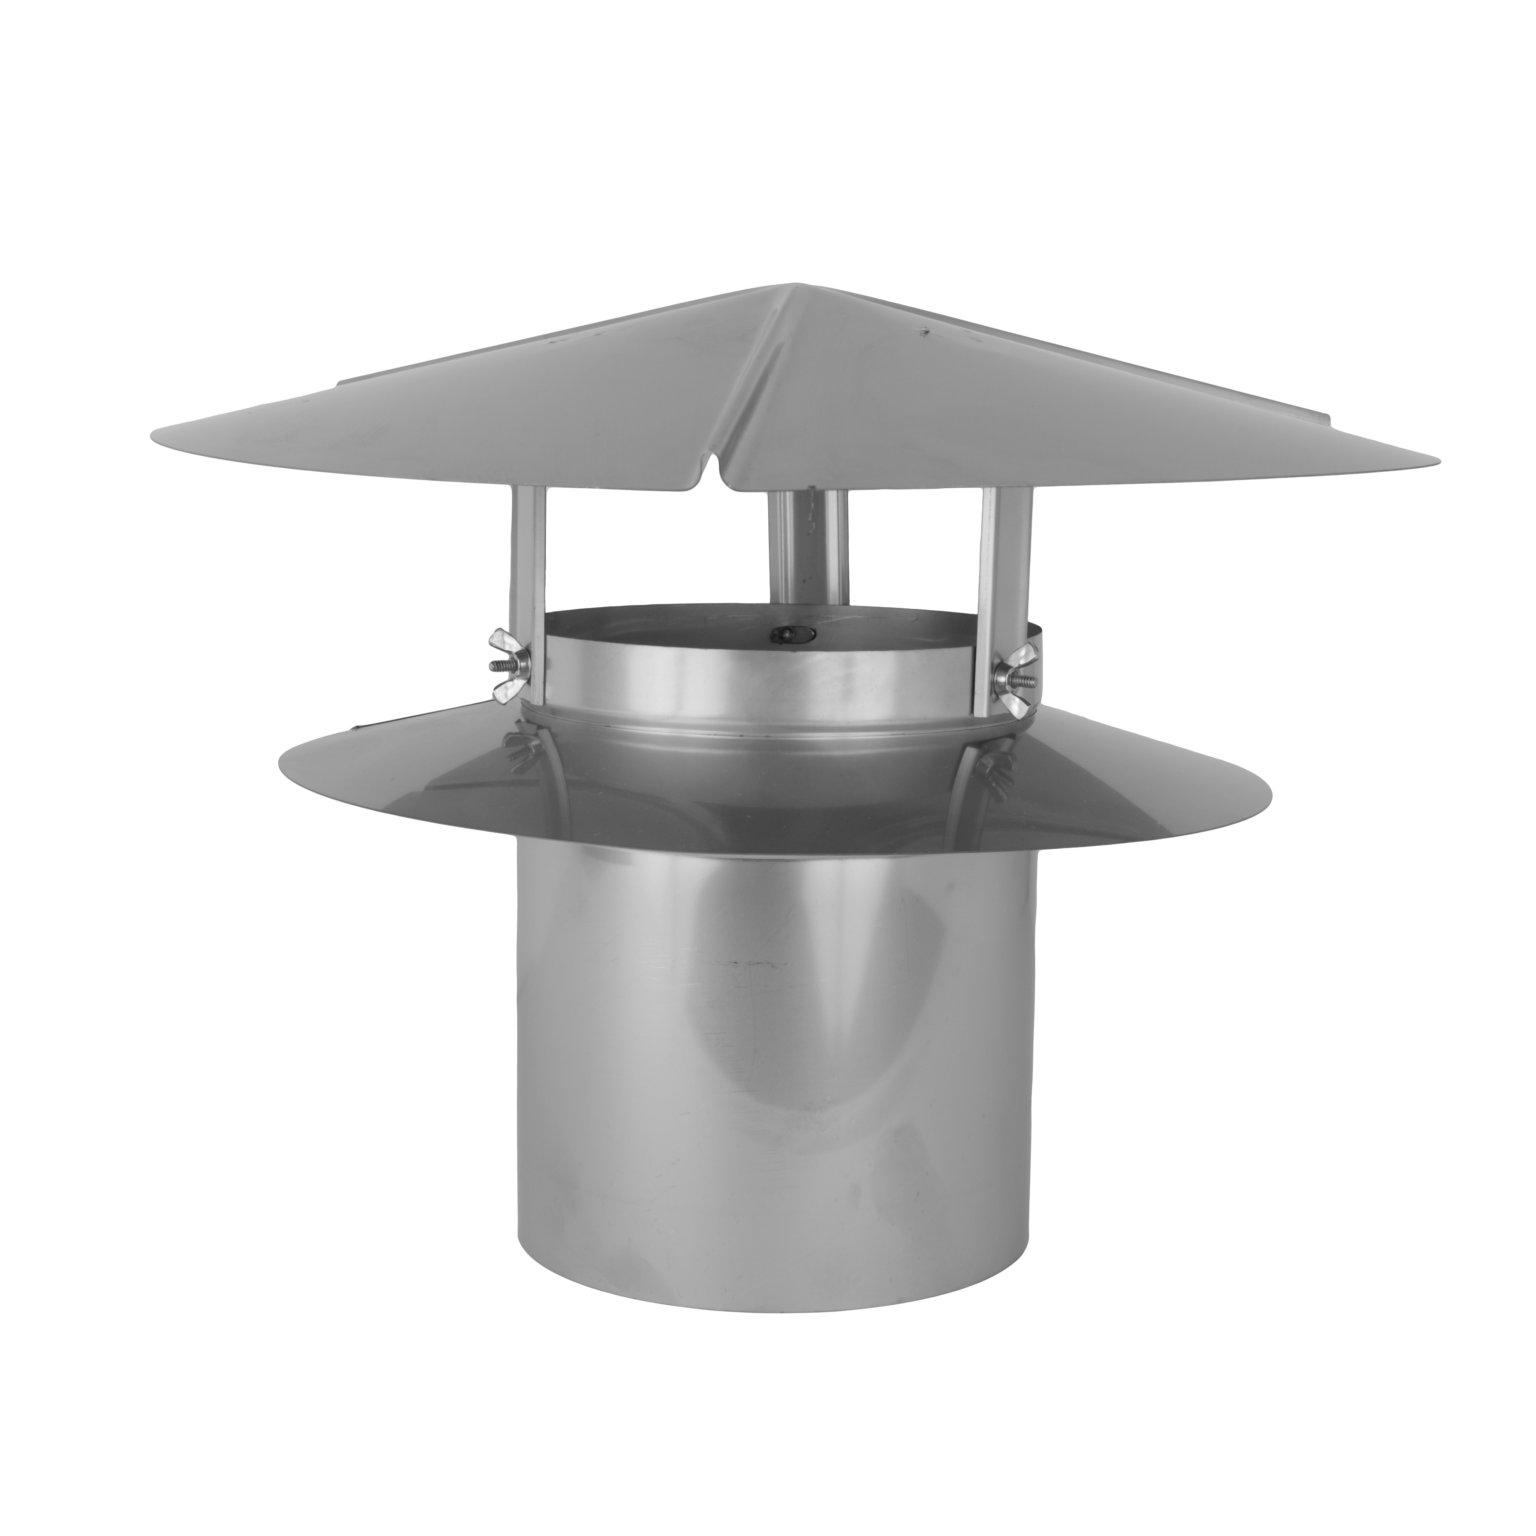 Chimney cover Fireplace Cover Chimney Hood Rain Cover Stainless steel special dimensions 